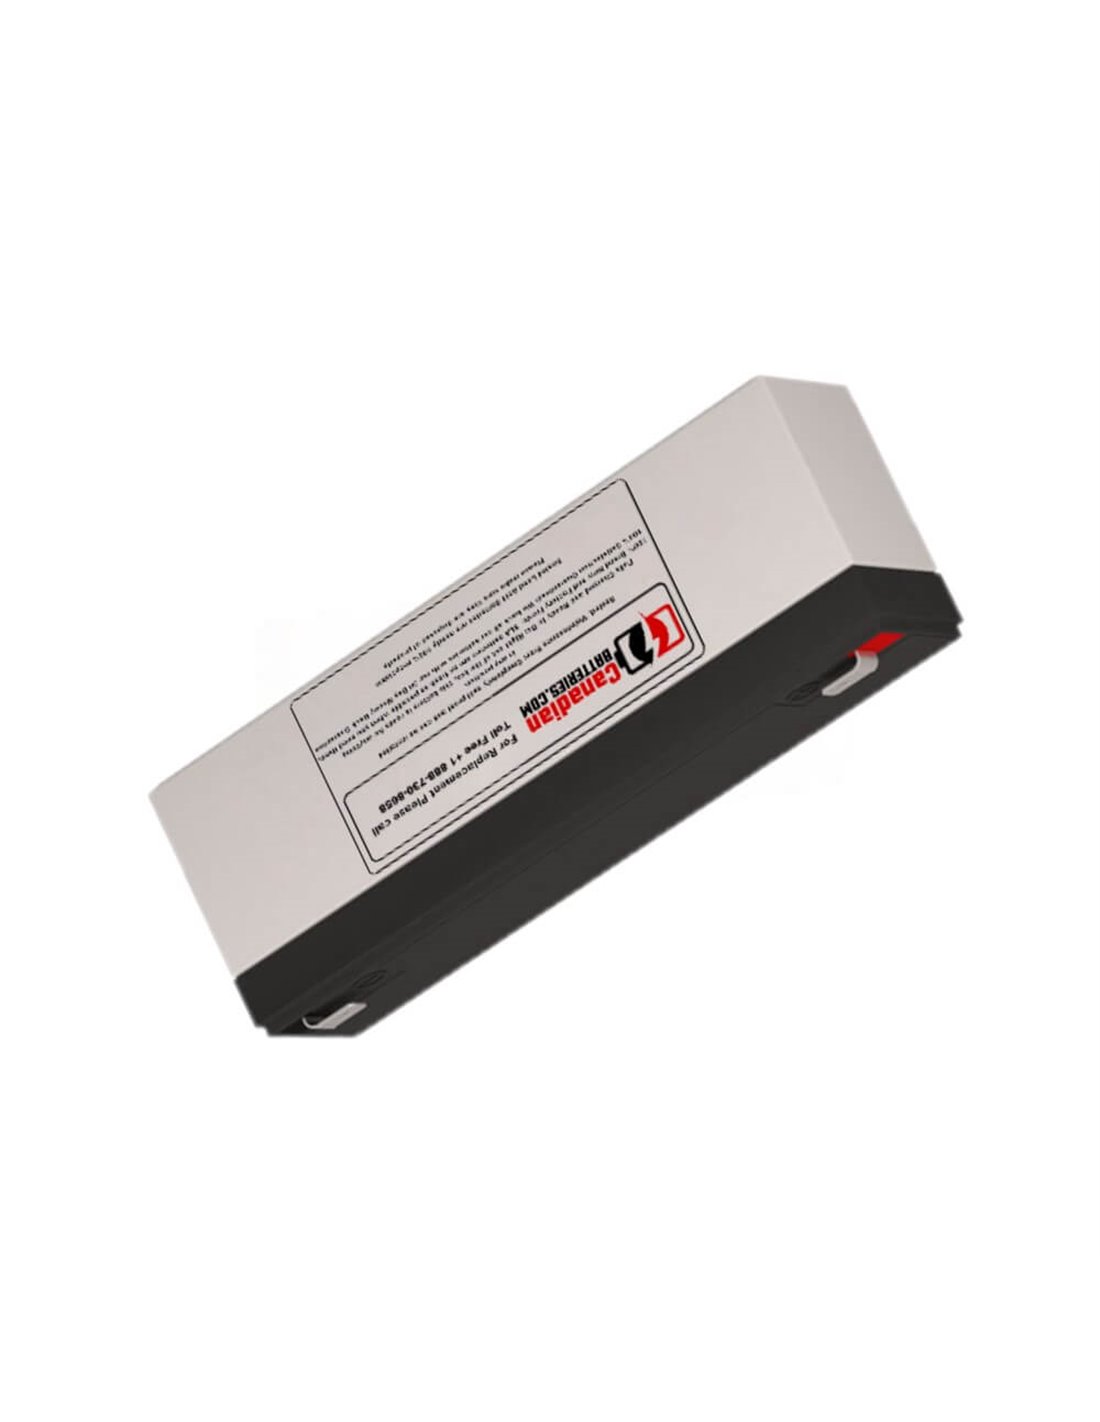 Battery for Intellipower Nd Ps1220 UPS, 1 x 12V, 2.3Ah - 27.6Wh